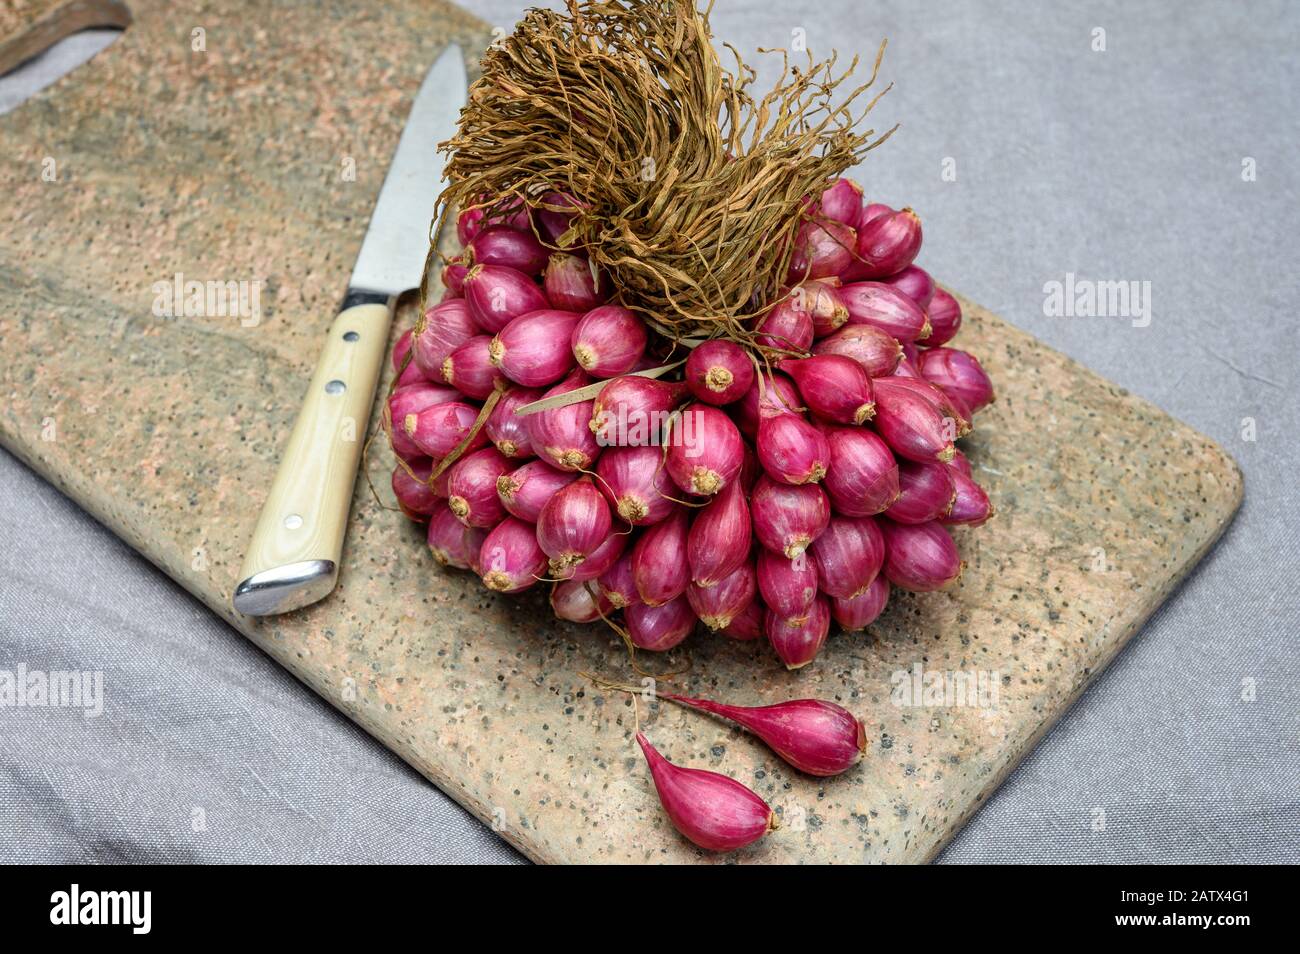 Bunch of high quality small red shallot sambar onions from India Stock Photo